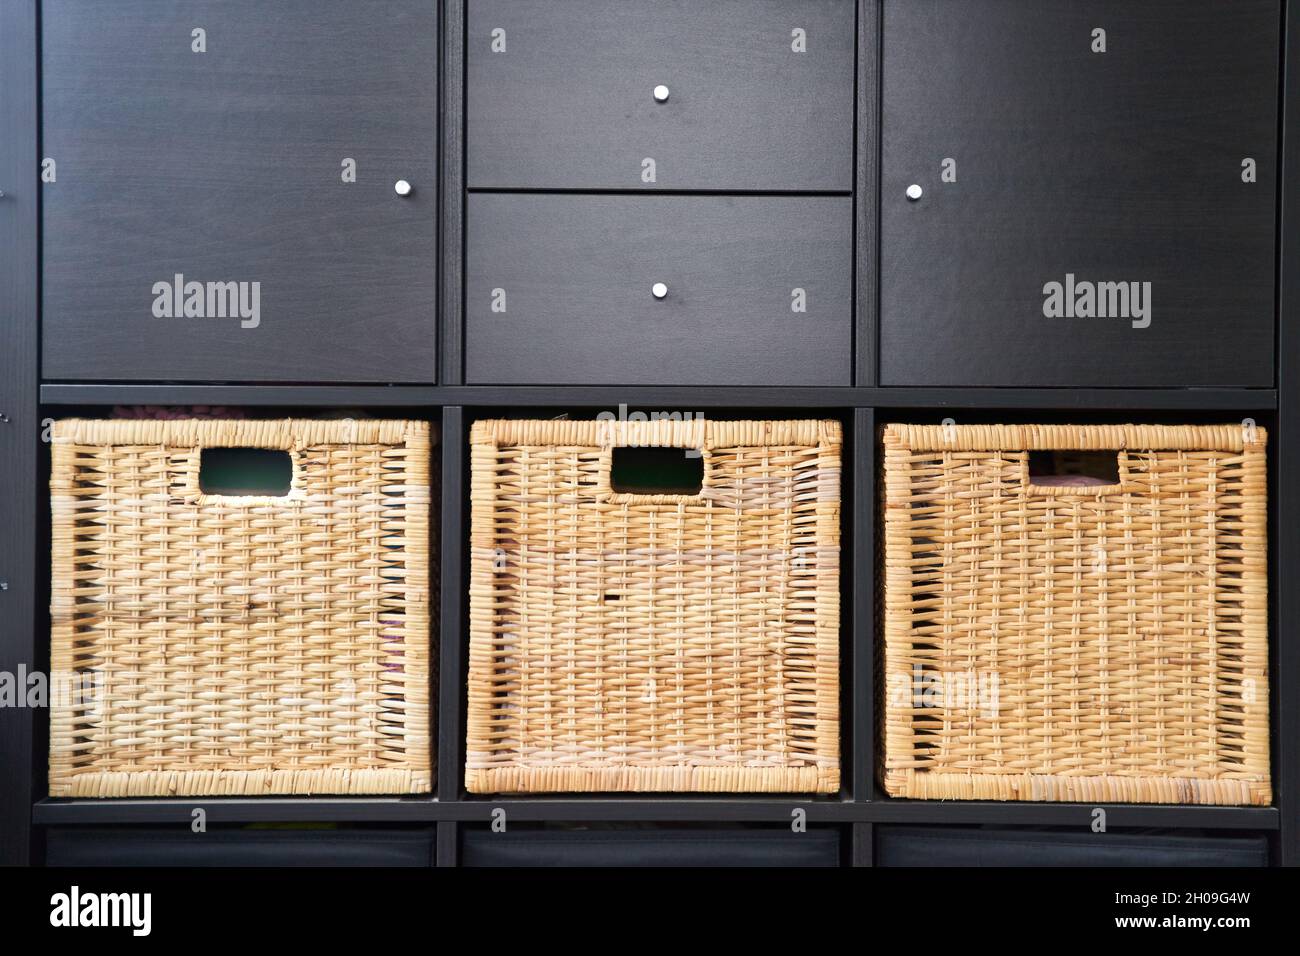 Wicker boxes for things on the shelves. Wardrobe for storage of things Stock Photo